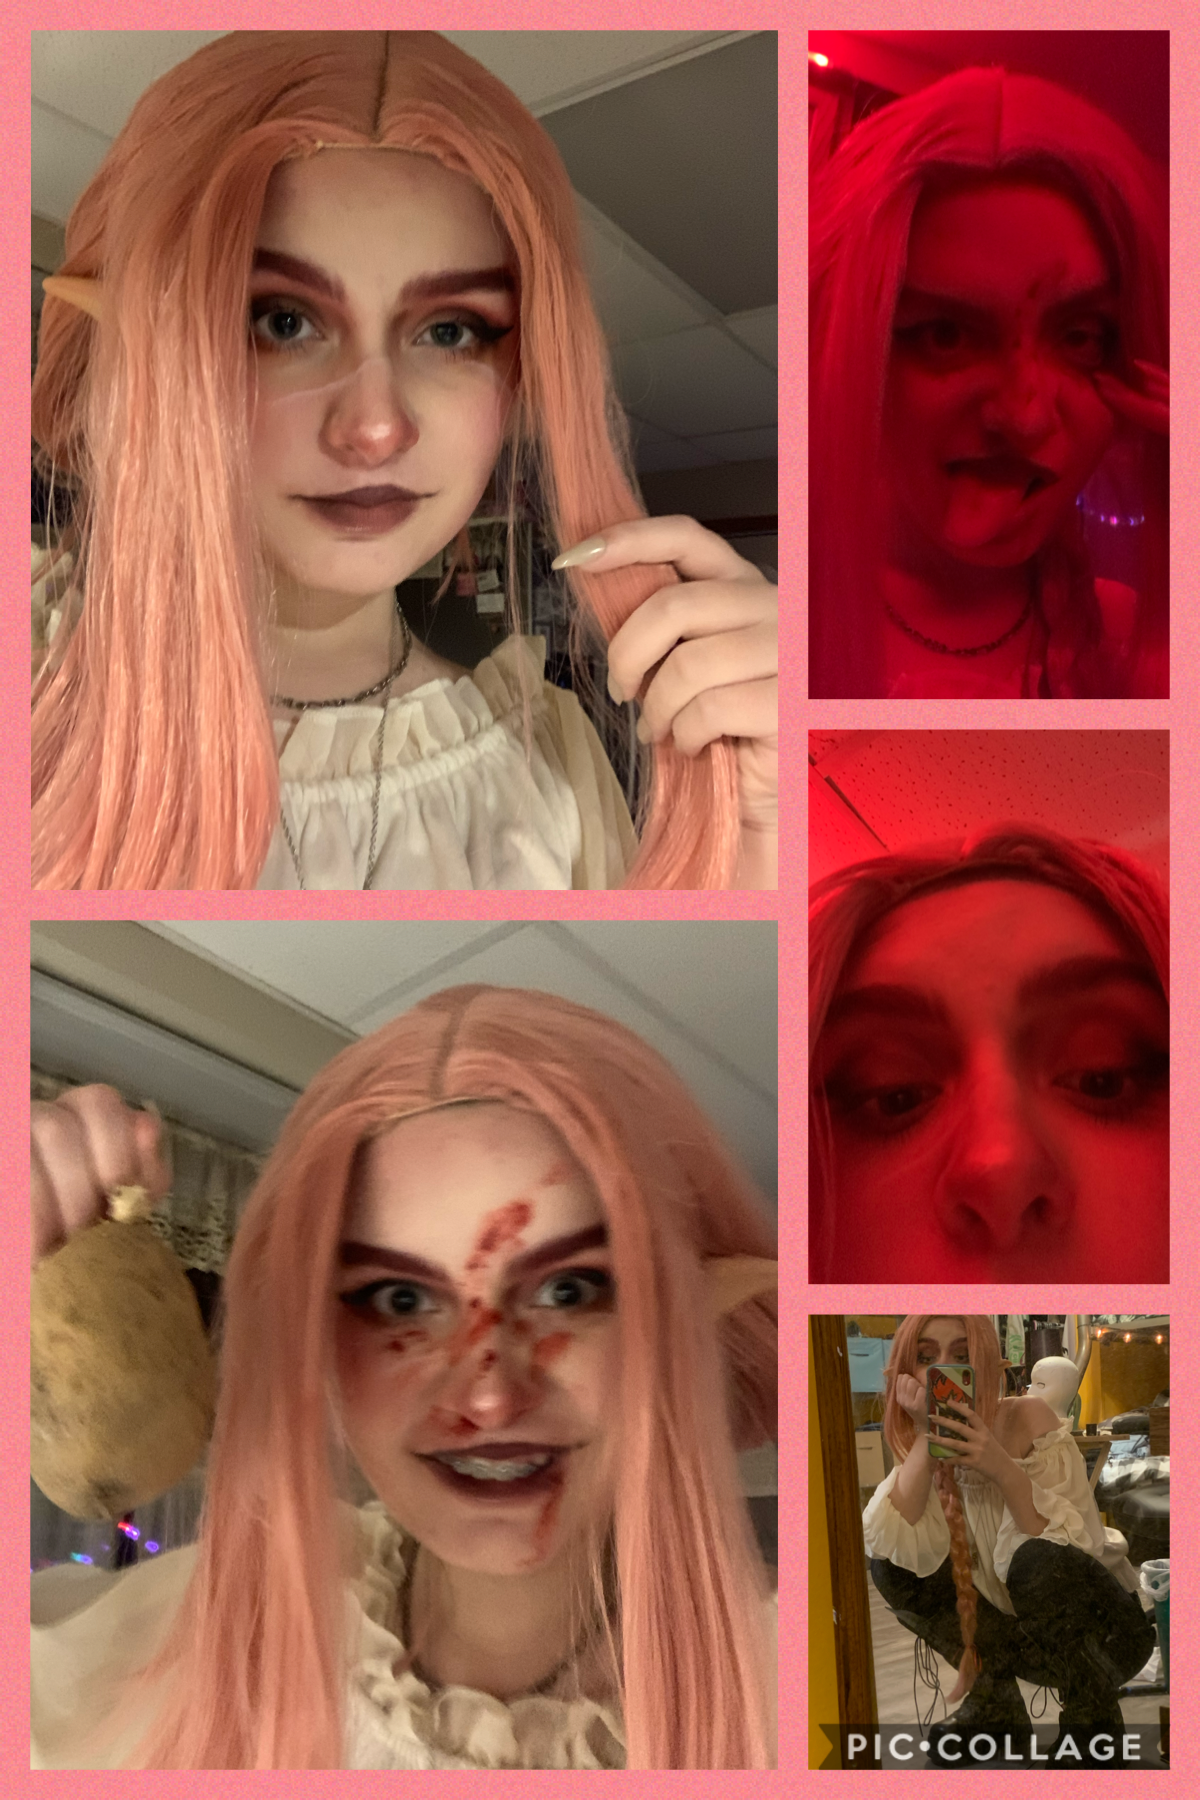 technoblade costest awooga 